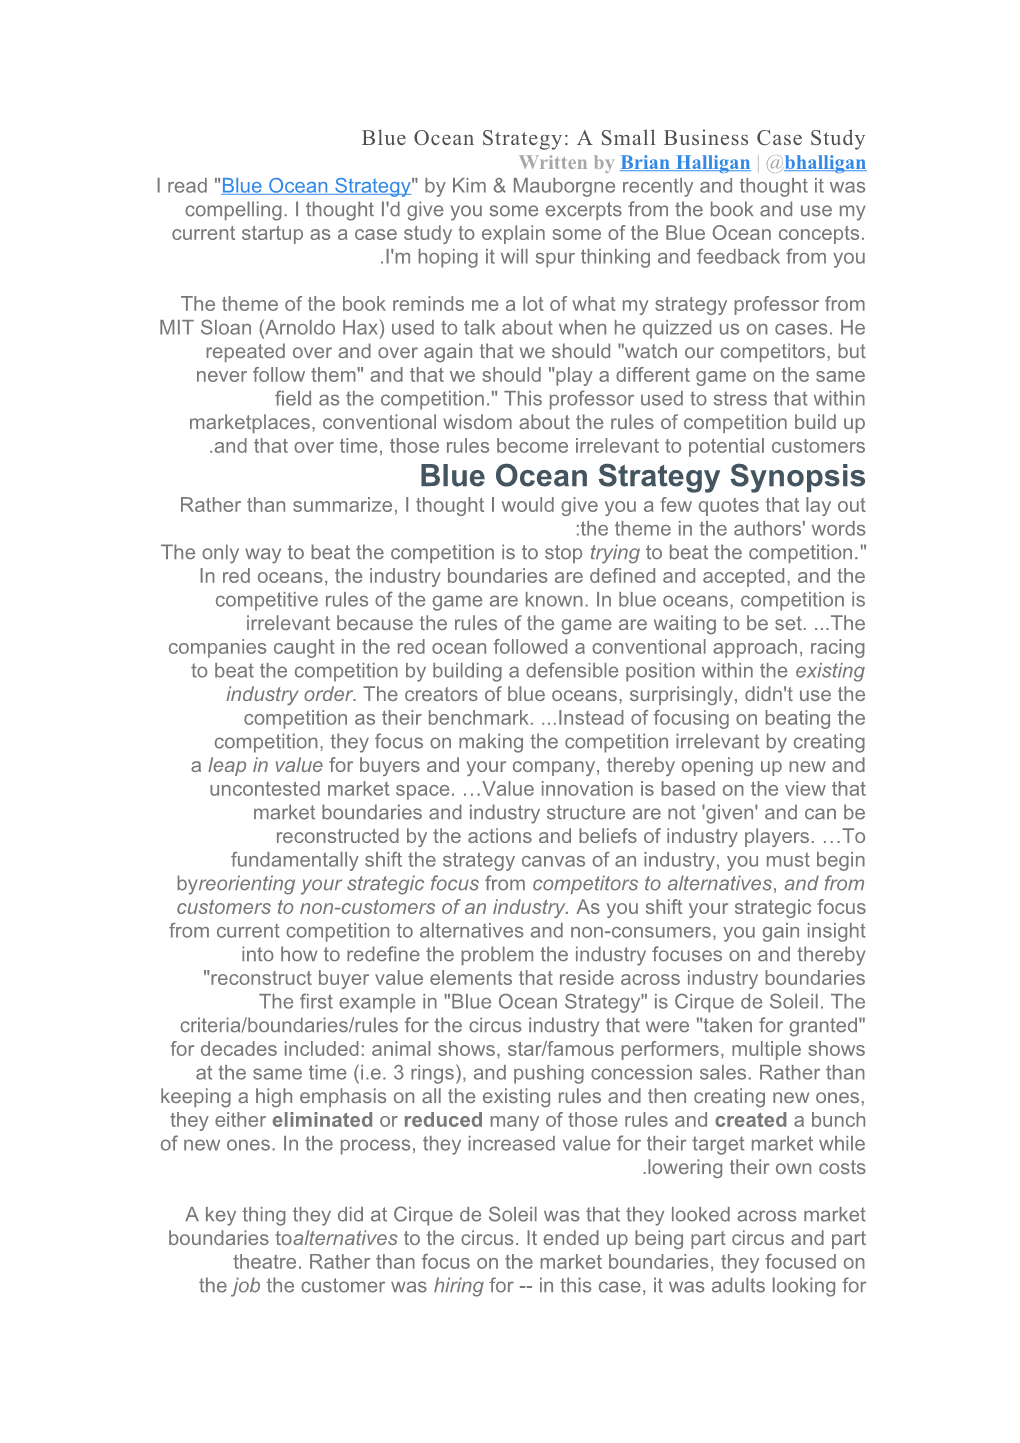 Blue Ocean Strategy: a Small Business Case Study